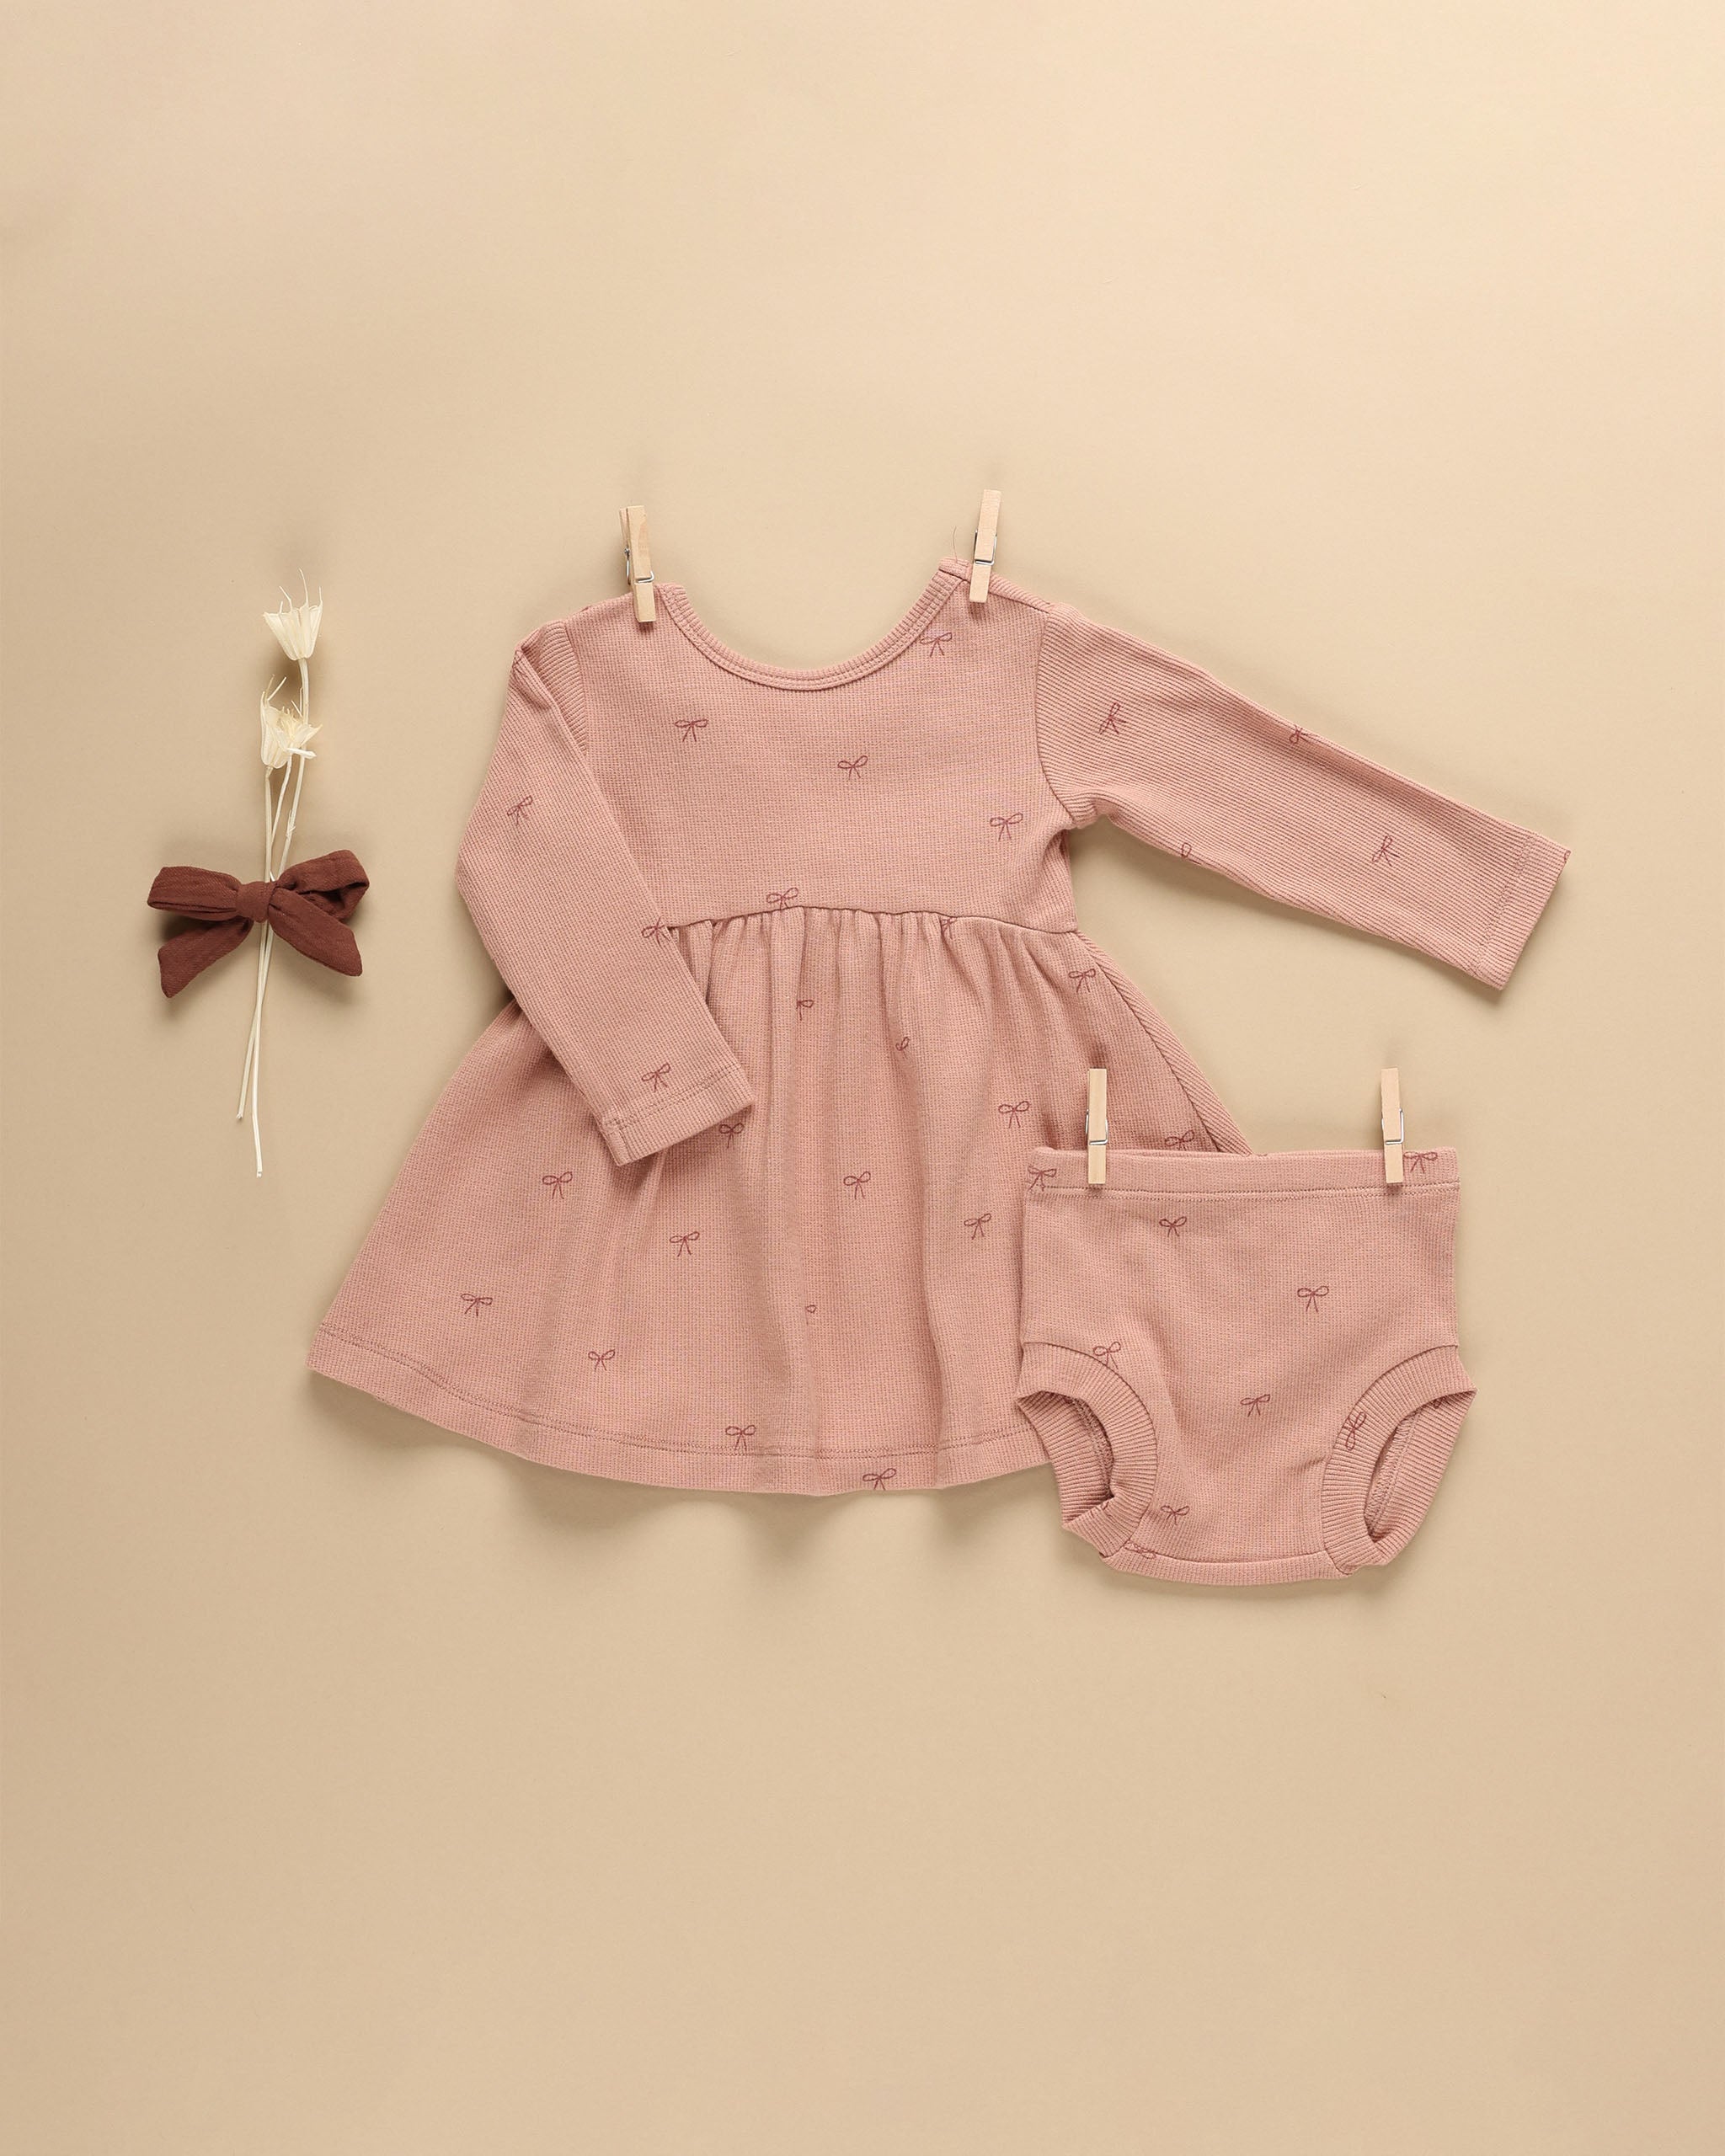 Ribbed Long Sleeve Dress || Bows - Rylee + Cru | Kids Clothes | Trendy Baby Clothes | Modern Infant Outfits |